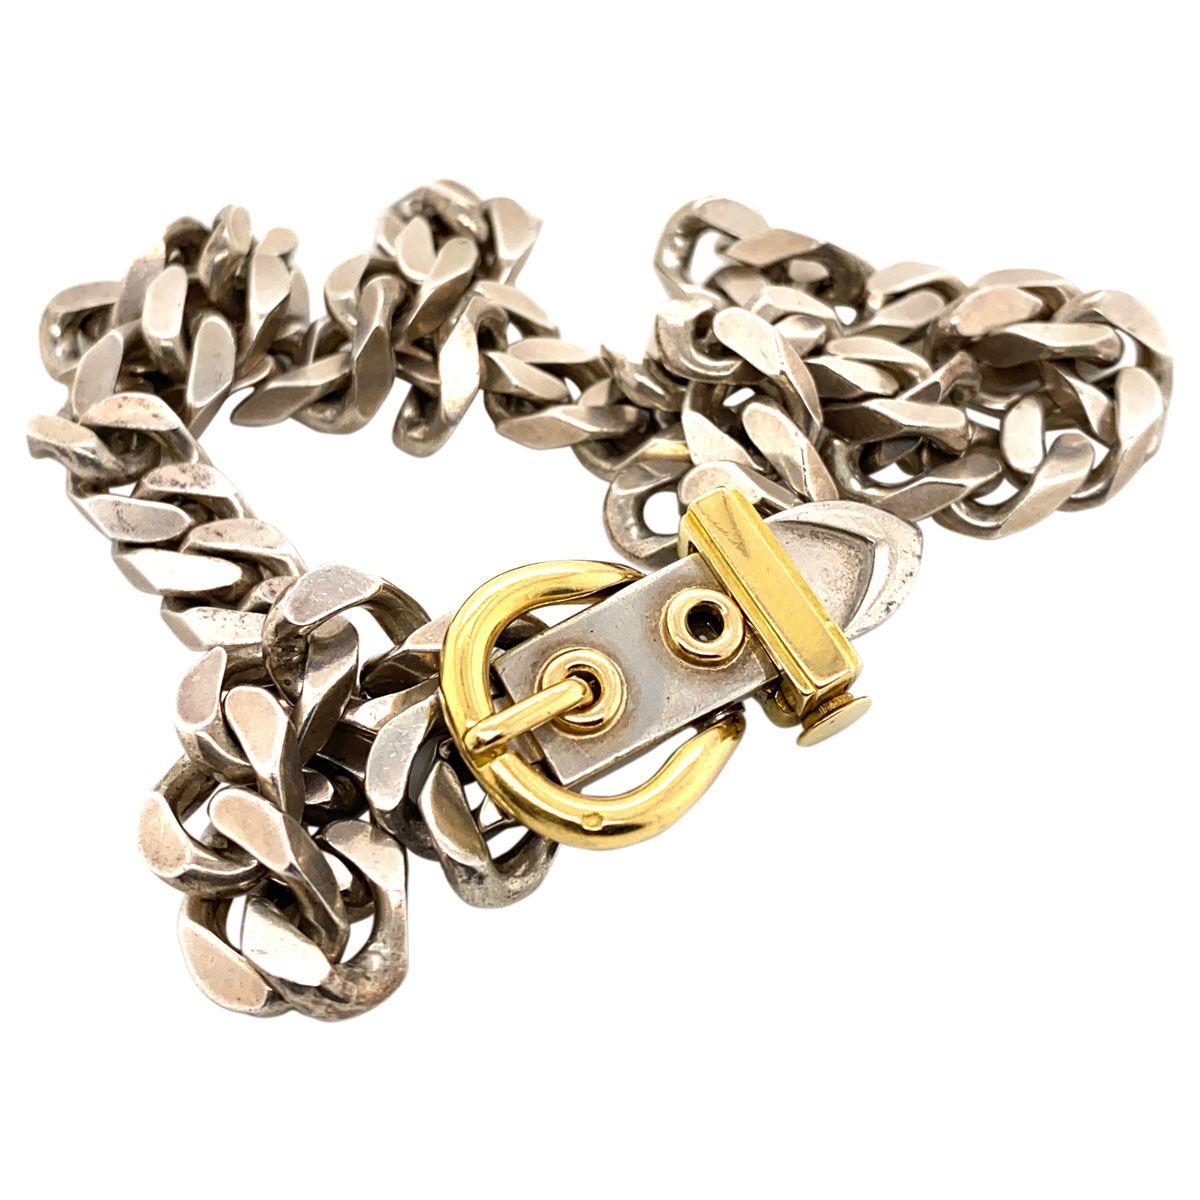 Contemporary Hermes Paris Sterling Silver and 18 Karat Yellow Gold Curb Link Chain Necklace